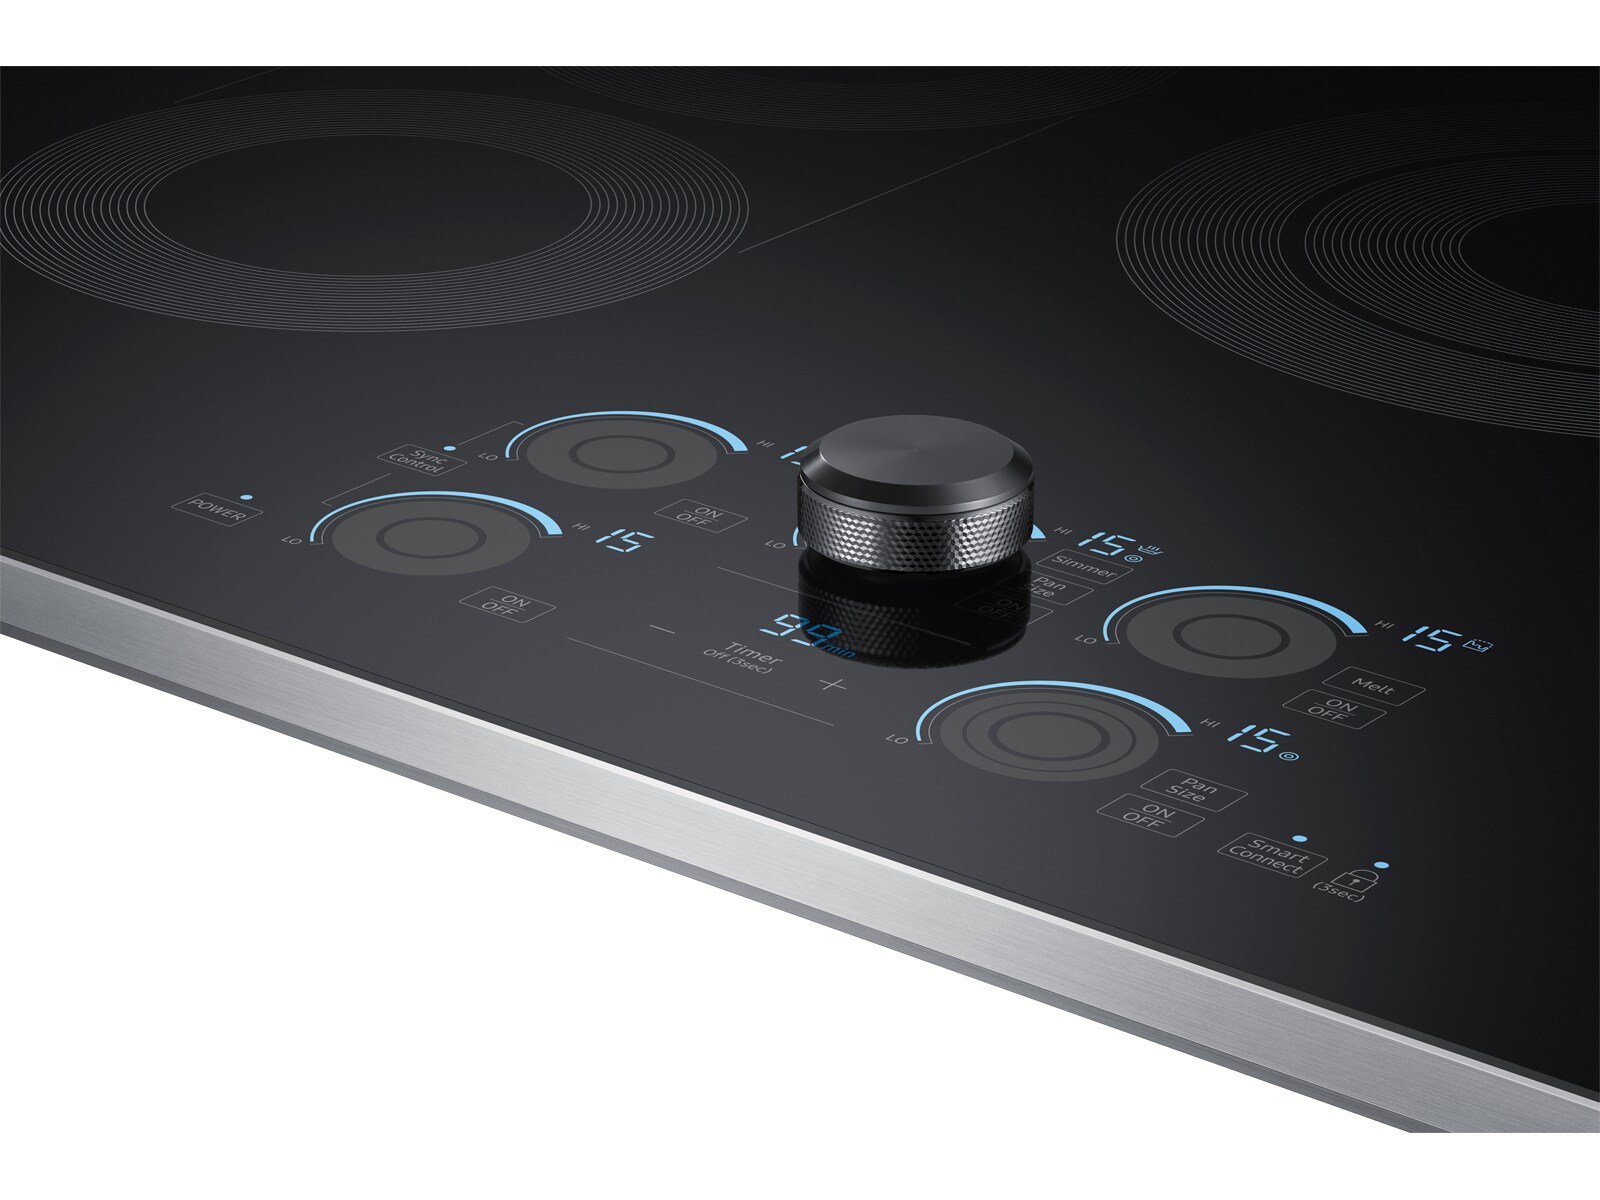 Reviews for Samsung 30 in. Radiant Electric Cooktop in Stainless